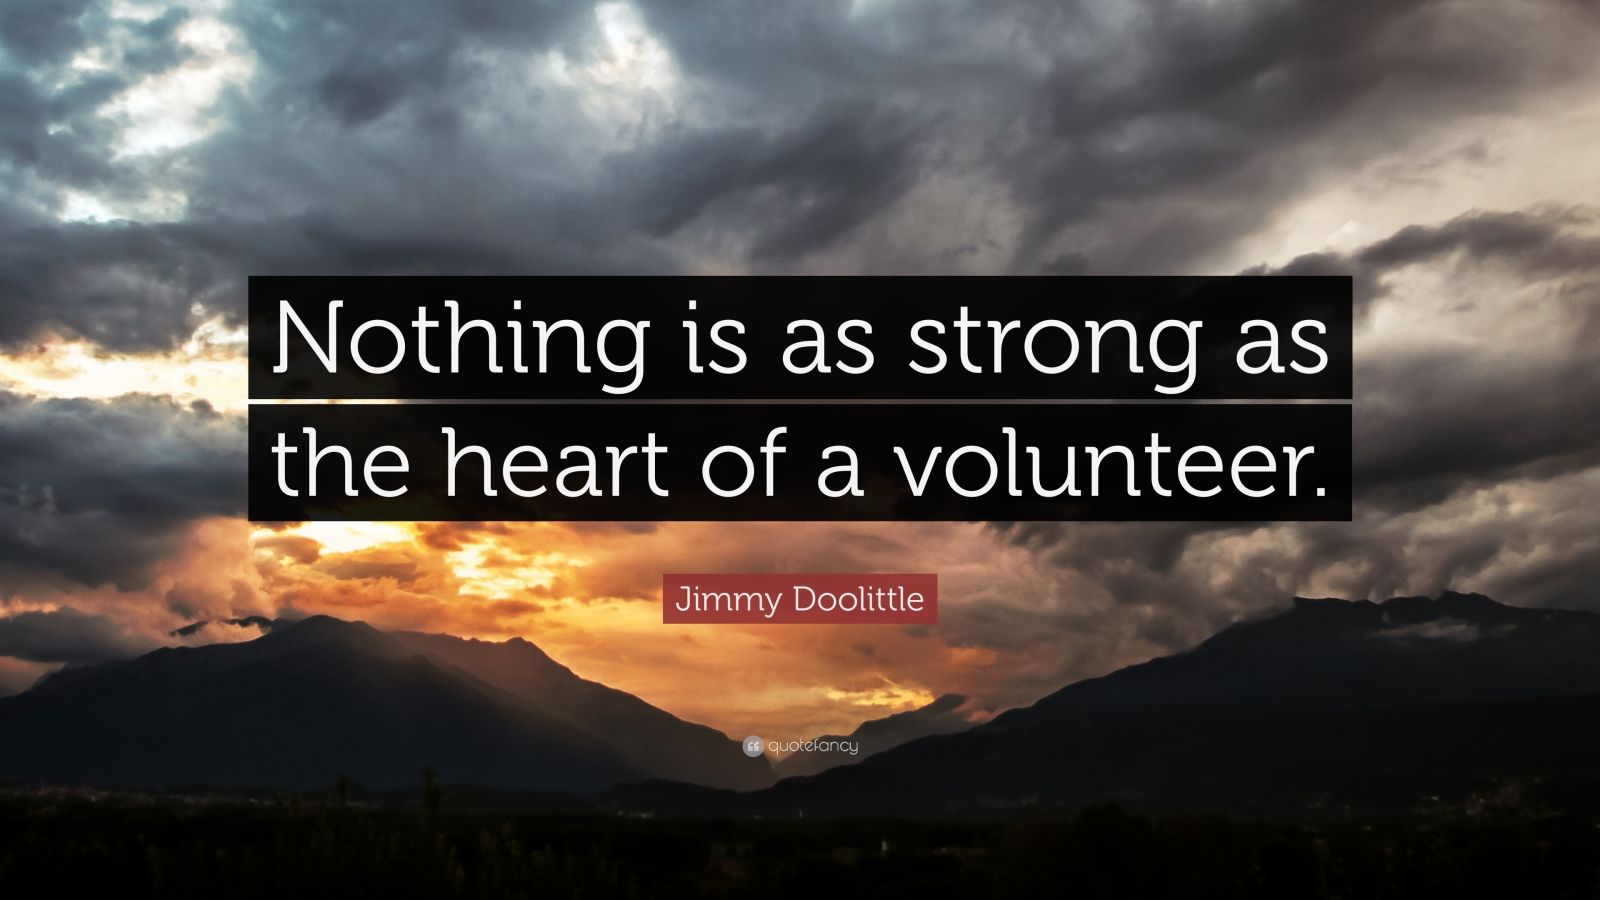 Jimmy Doolittle Quote “Nothing is as strong as the heart of a